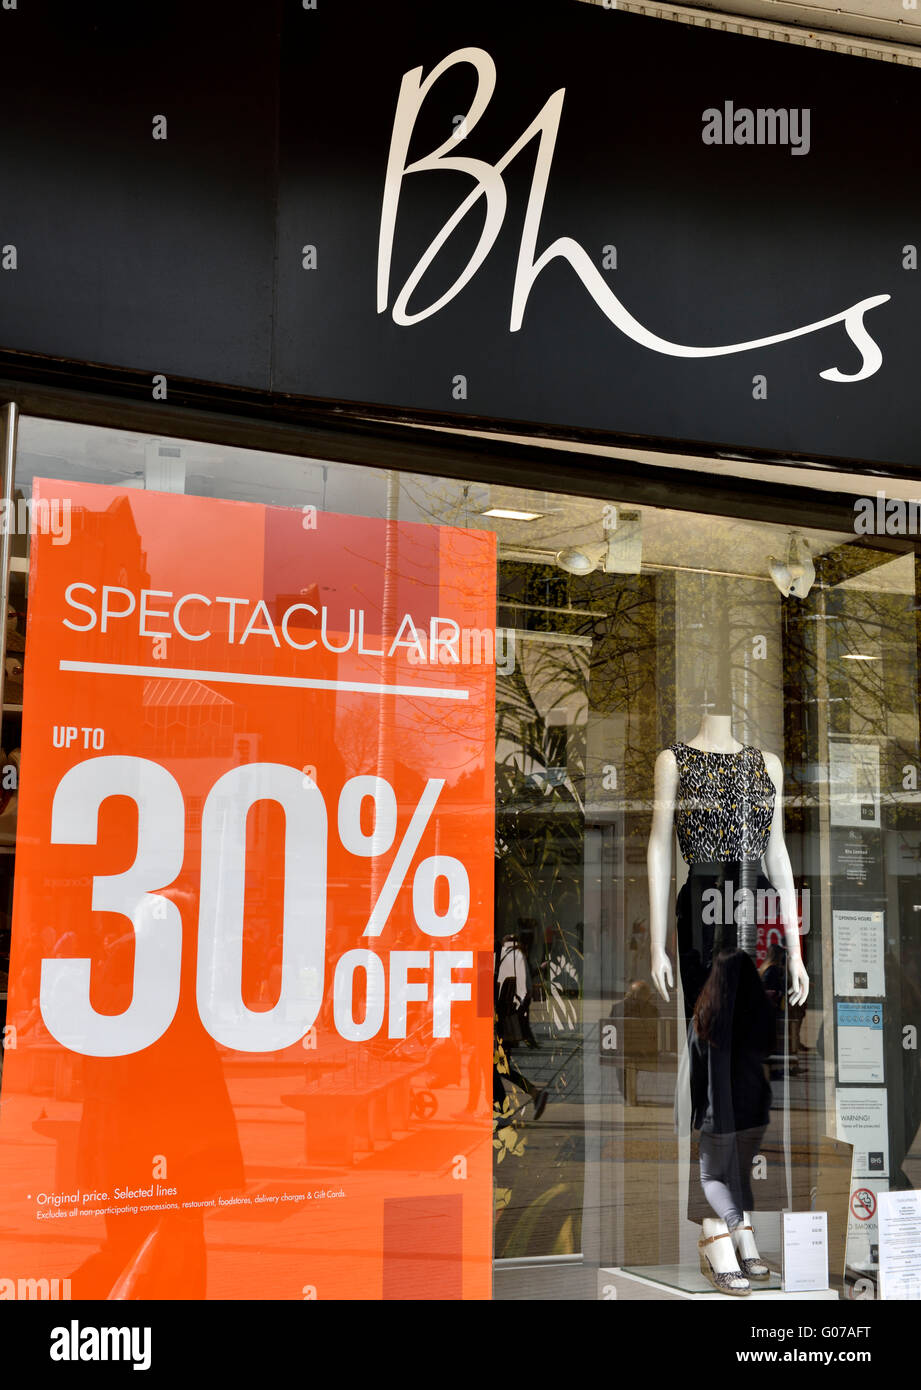 British Home Stores, BHS, Bristol Broadmead, UK, 30 April, 2016. With financial difficulties leading to collapse and administration the national chain of stores has sale on throughout stores. “Credit: CHARLES STIRLING/Alamy Live News” Stock Photo